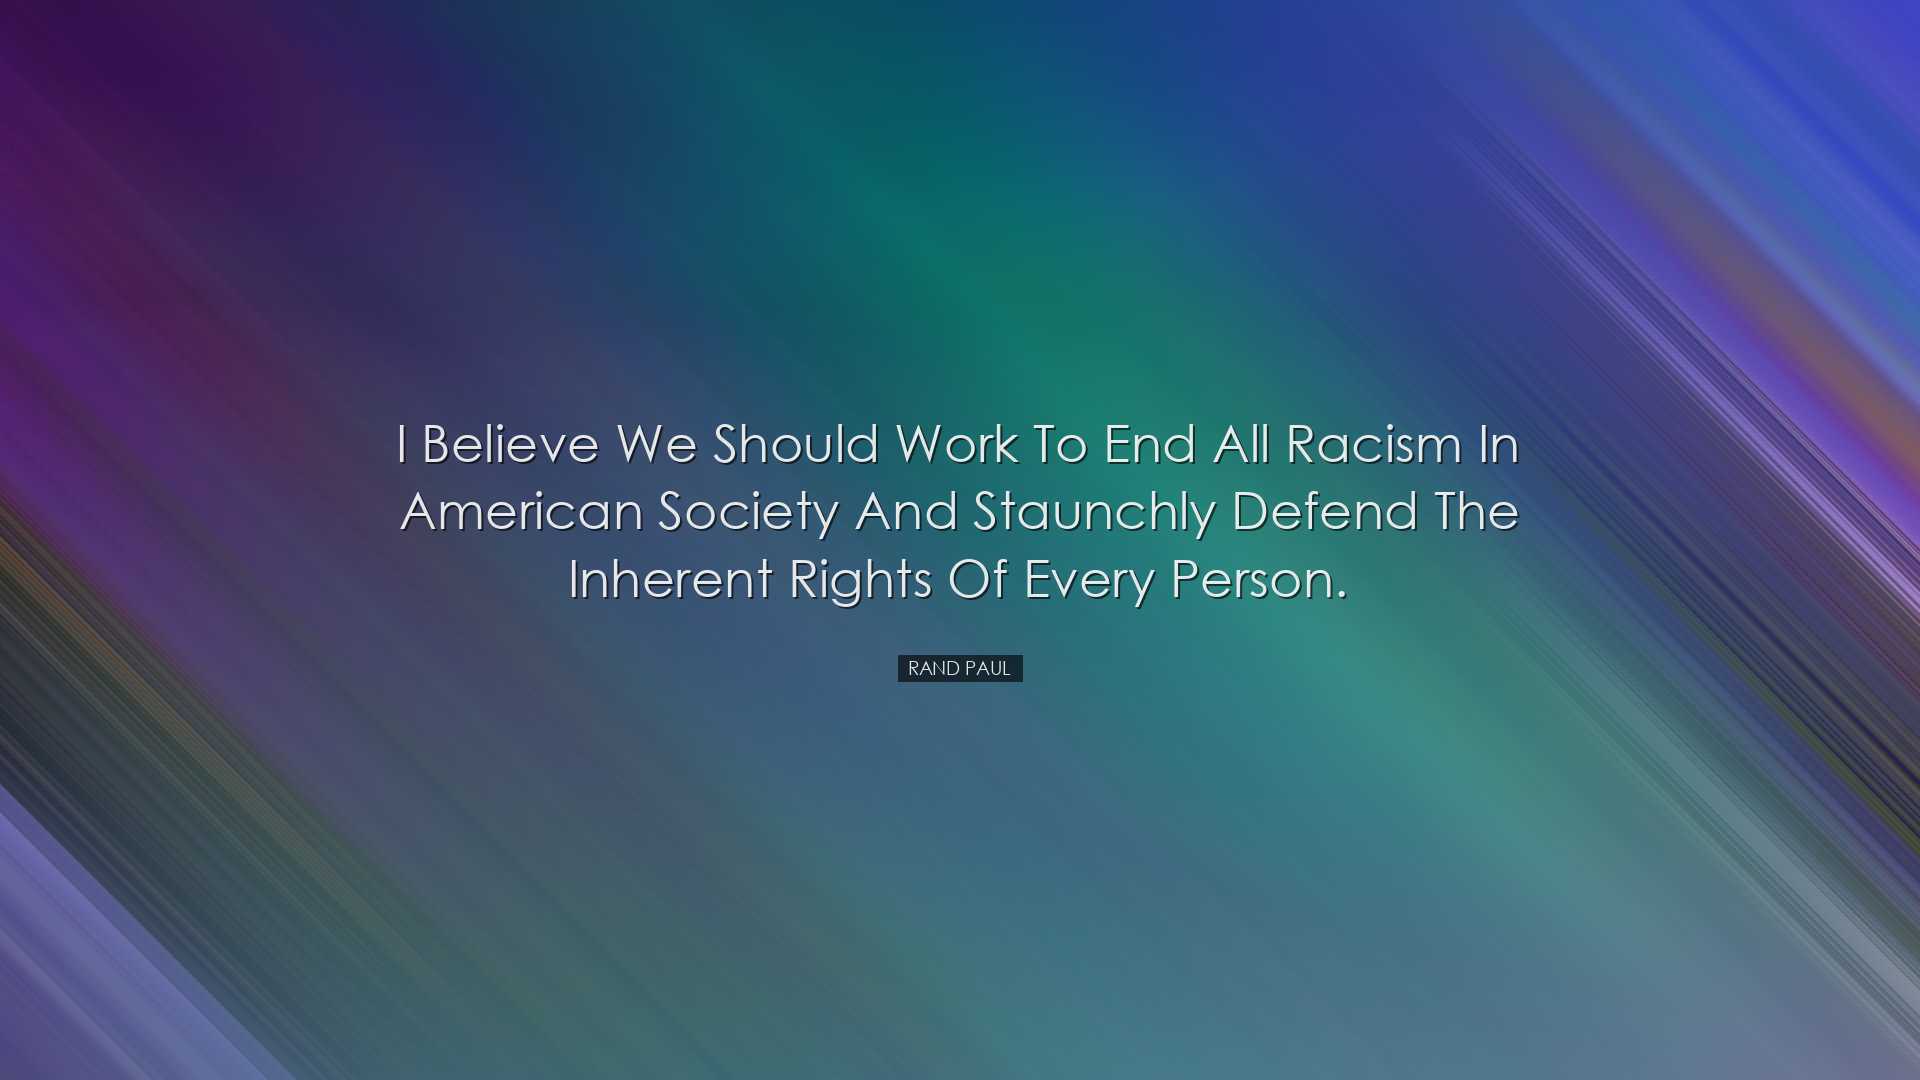 I believe we should work to end all racism in American society and